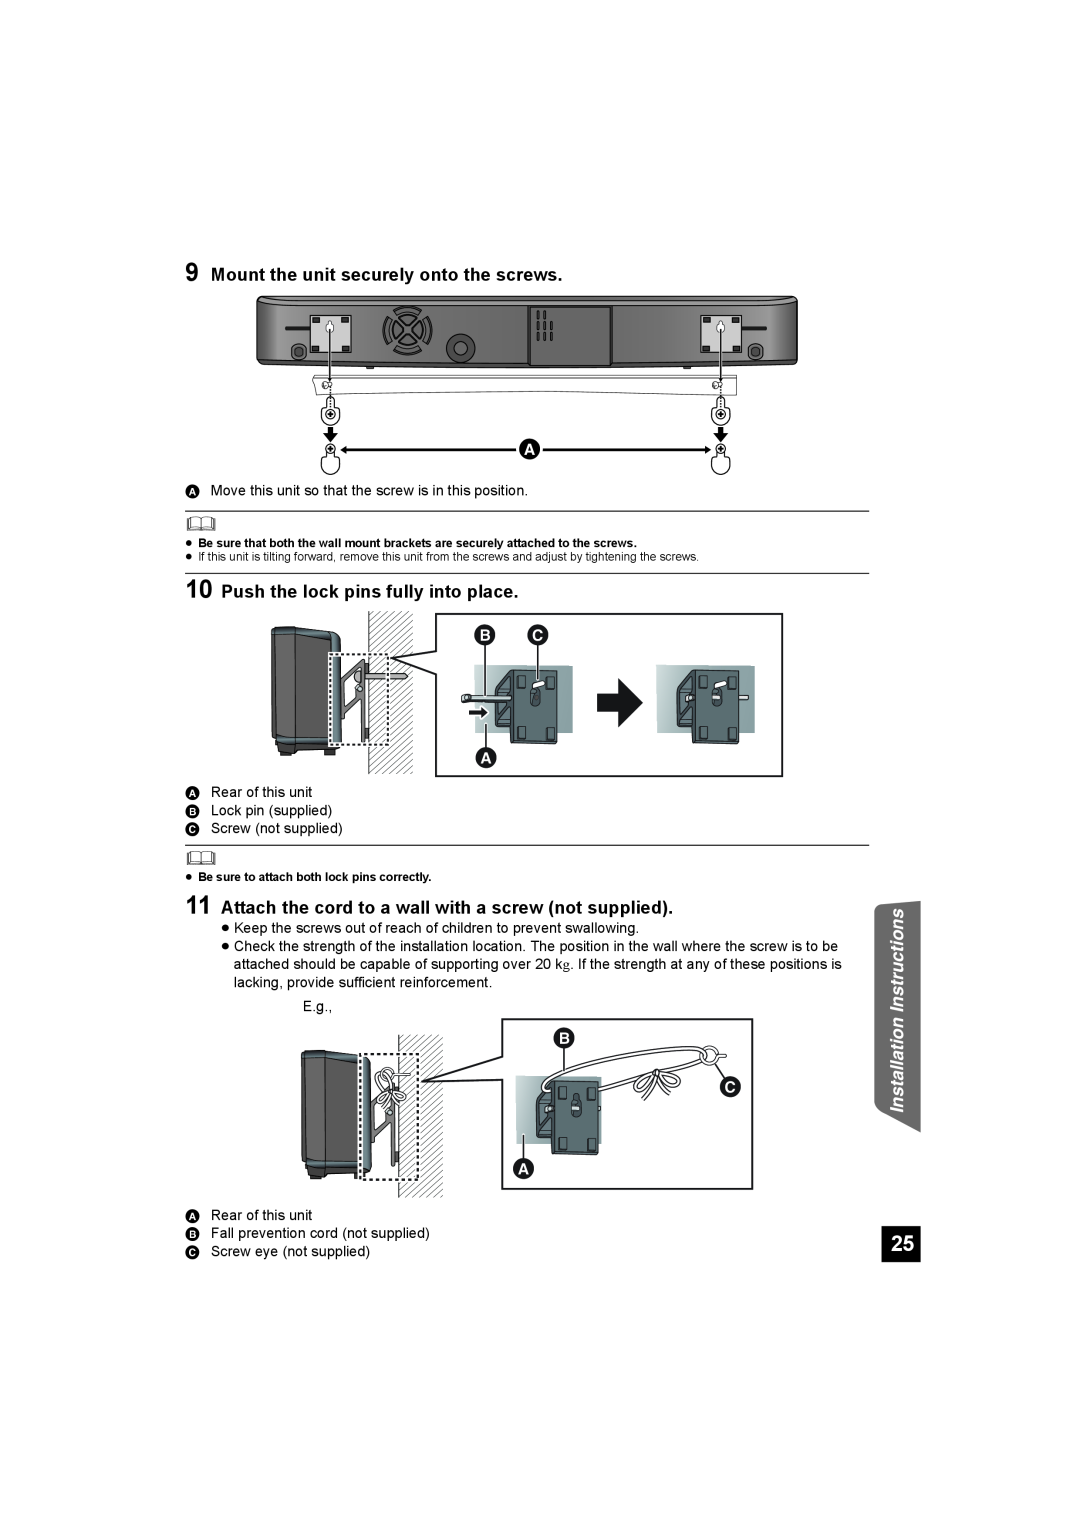 Panasonic SC-HTB10 operating instructions   , Installation Instructions, Mount the unit securely onto the screws 